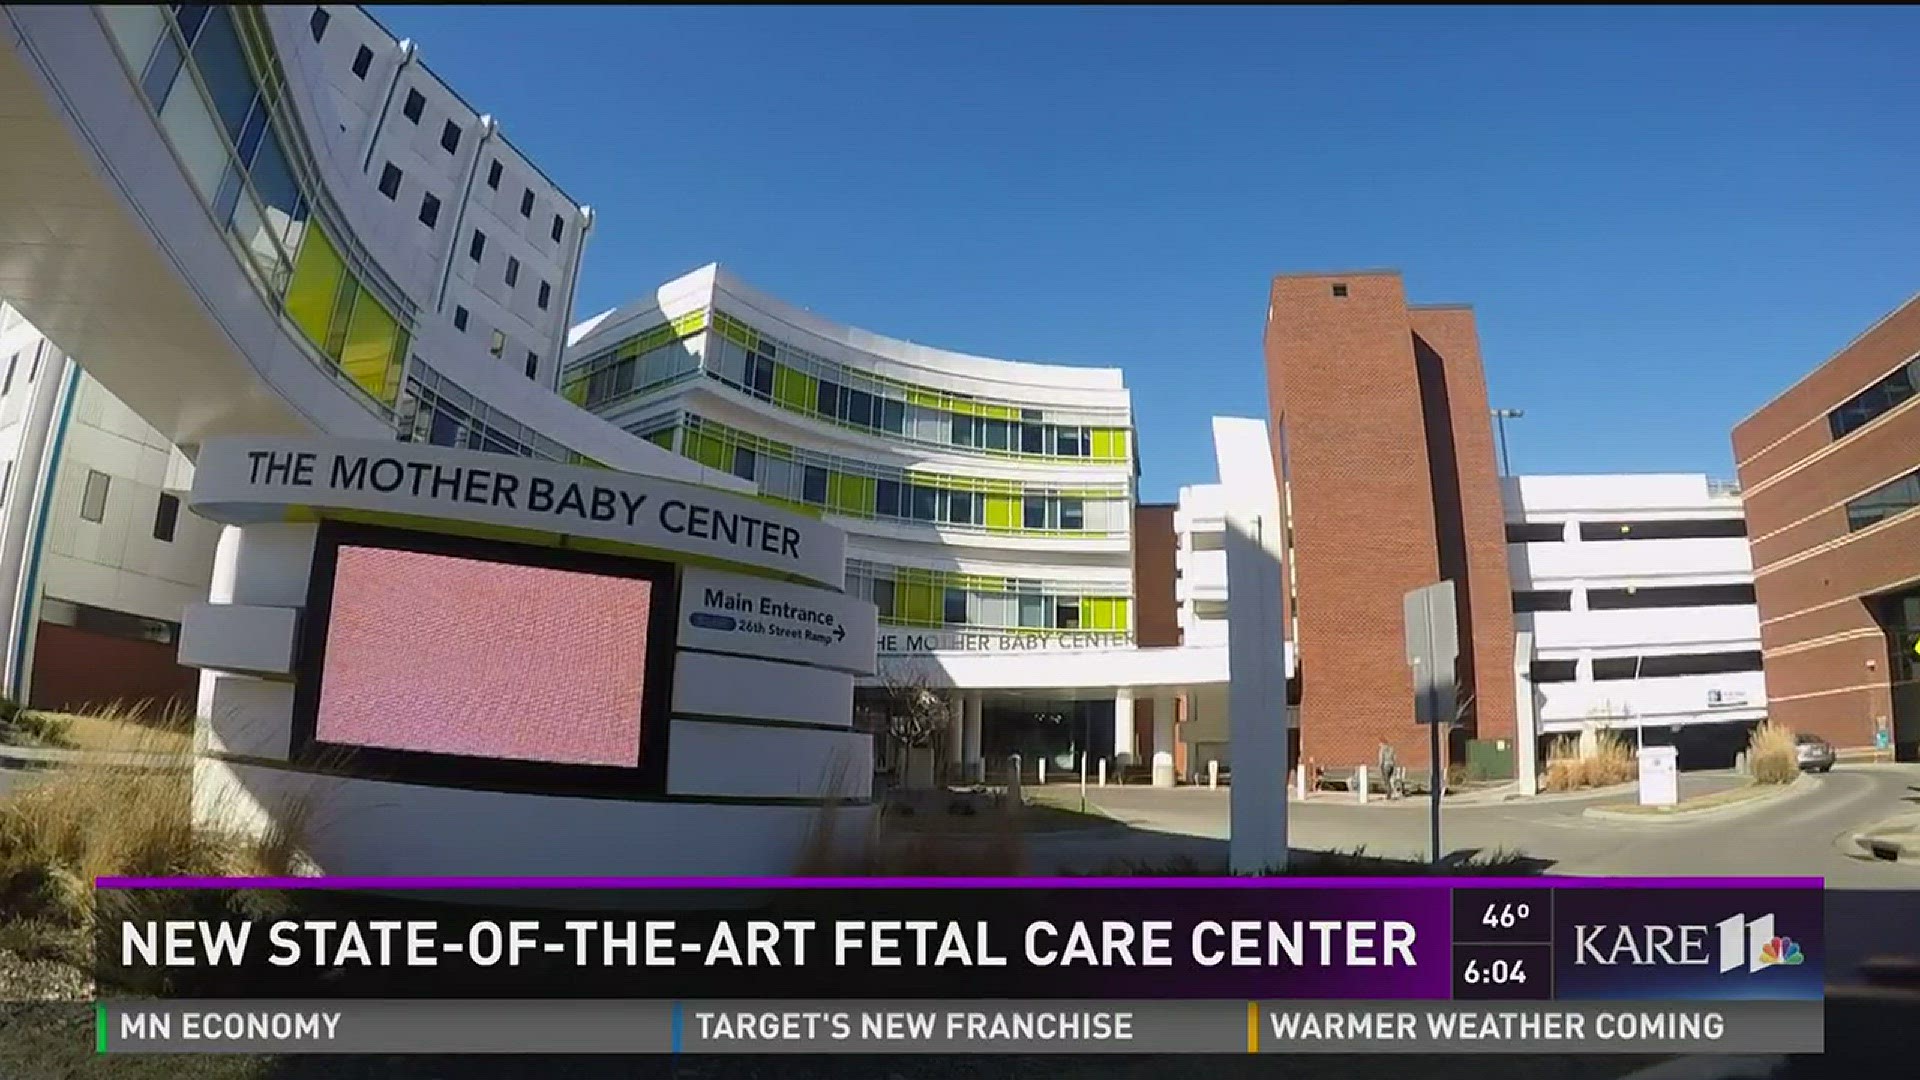 New state-of-the-art fetal care center